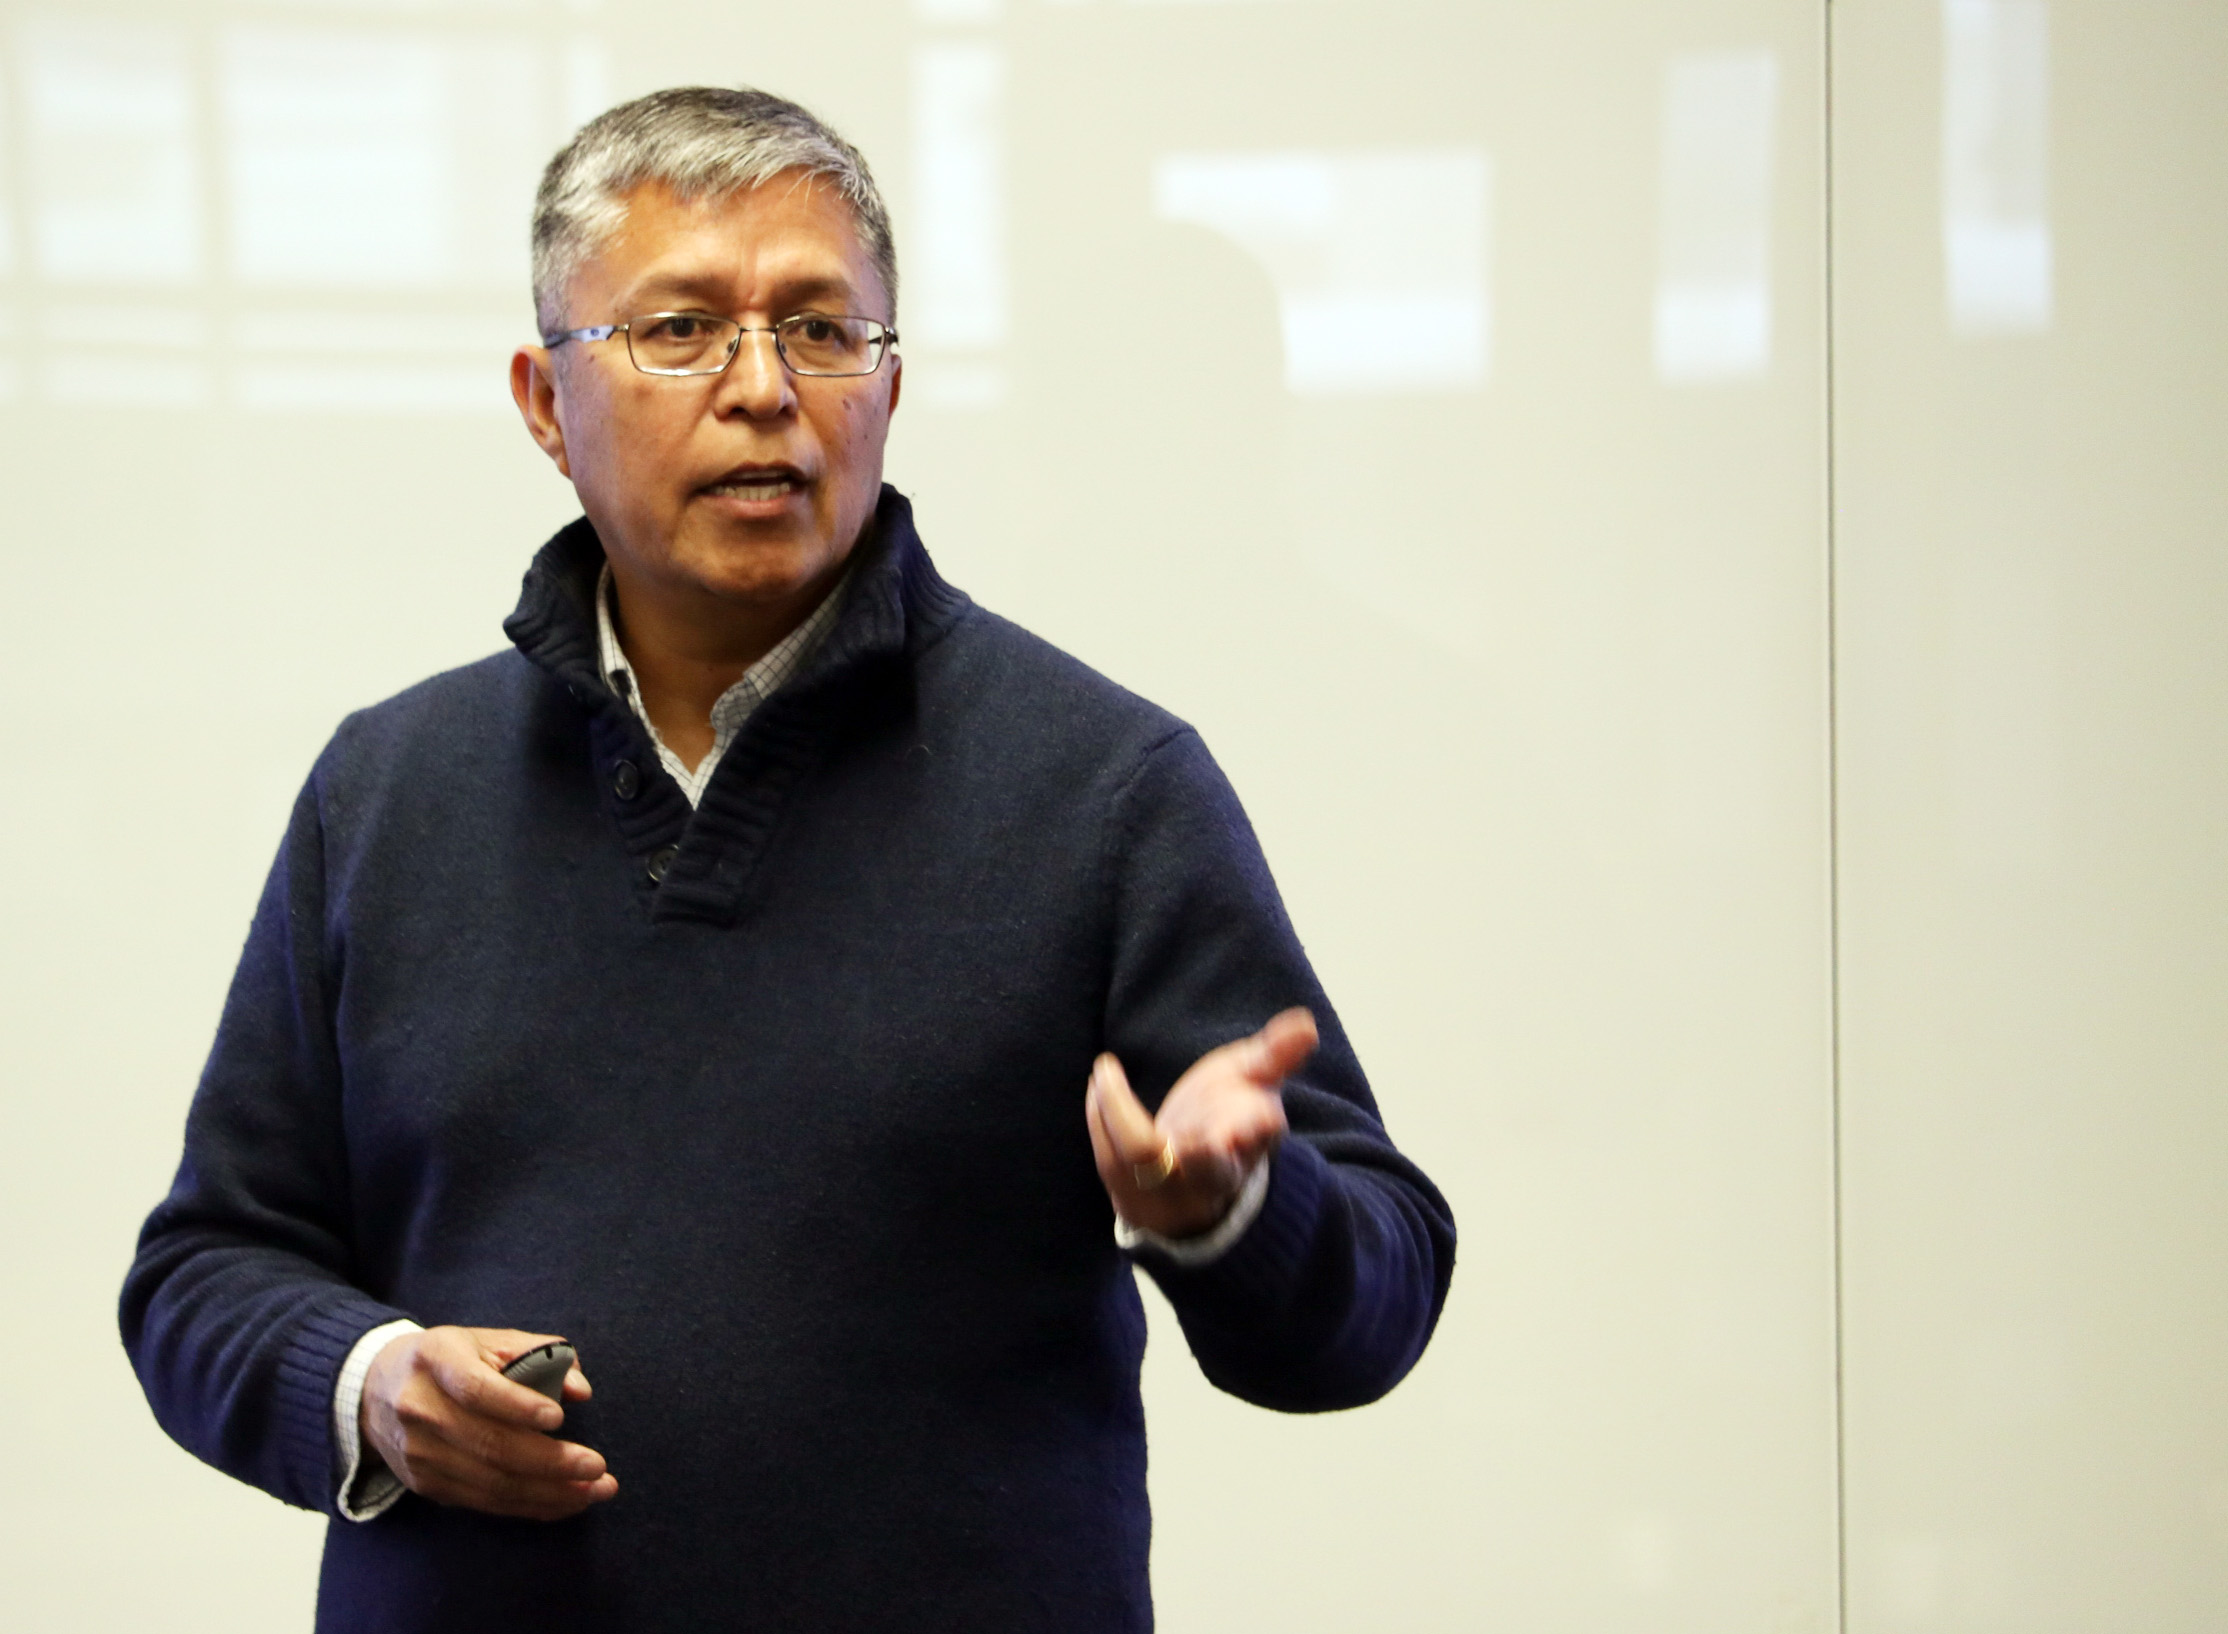 Head of Sandia Energy Storage Department Connects with Native Students